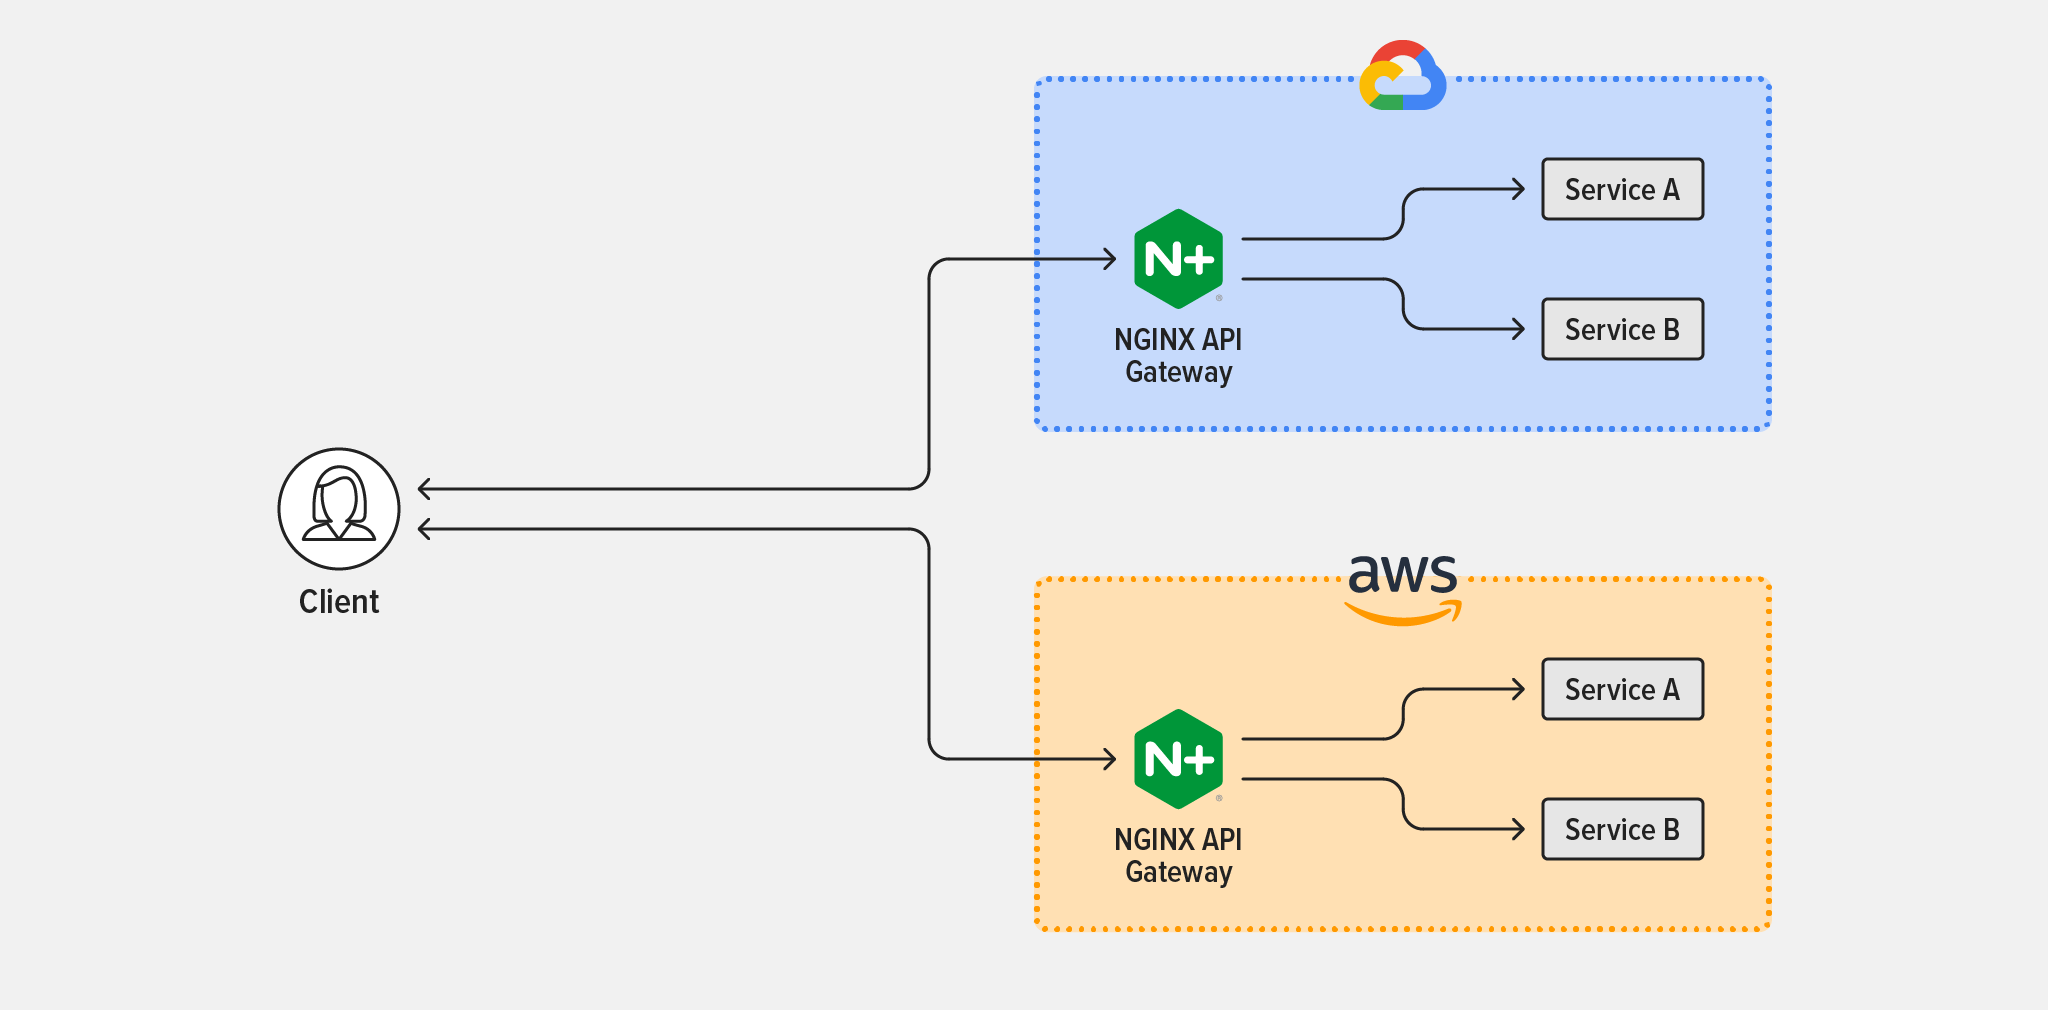 Topology with client accessing highly available API gateways deployed across two clouds